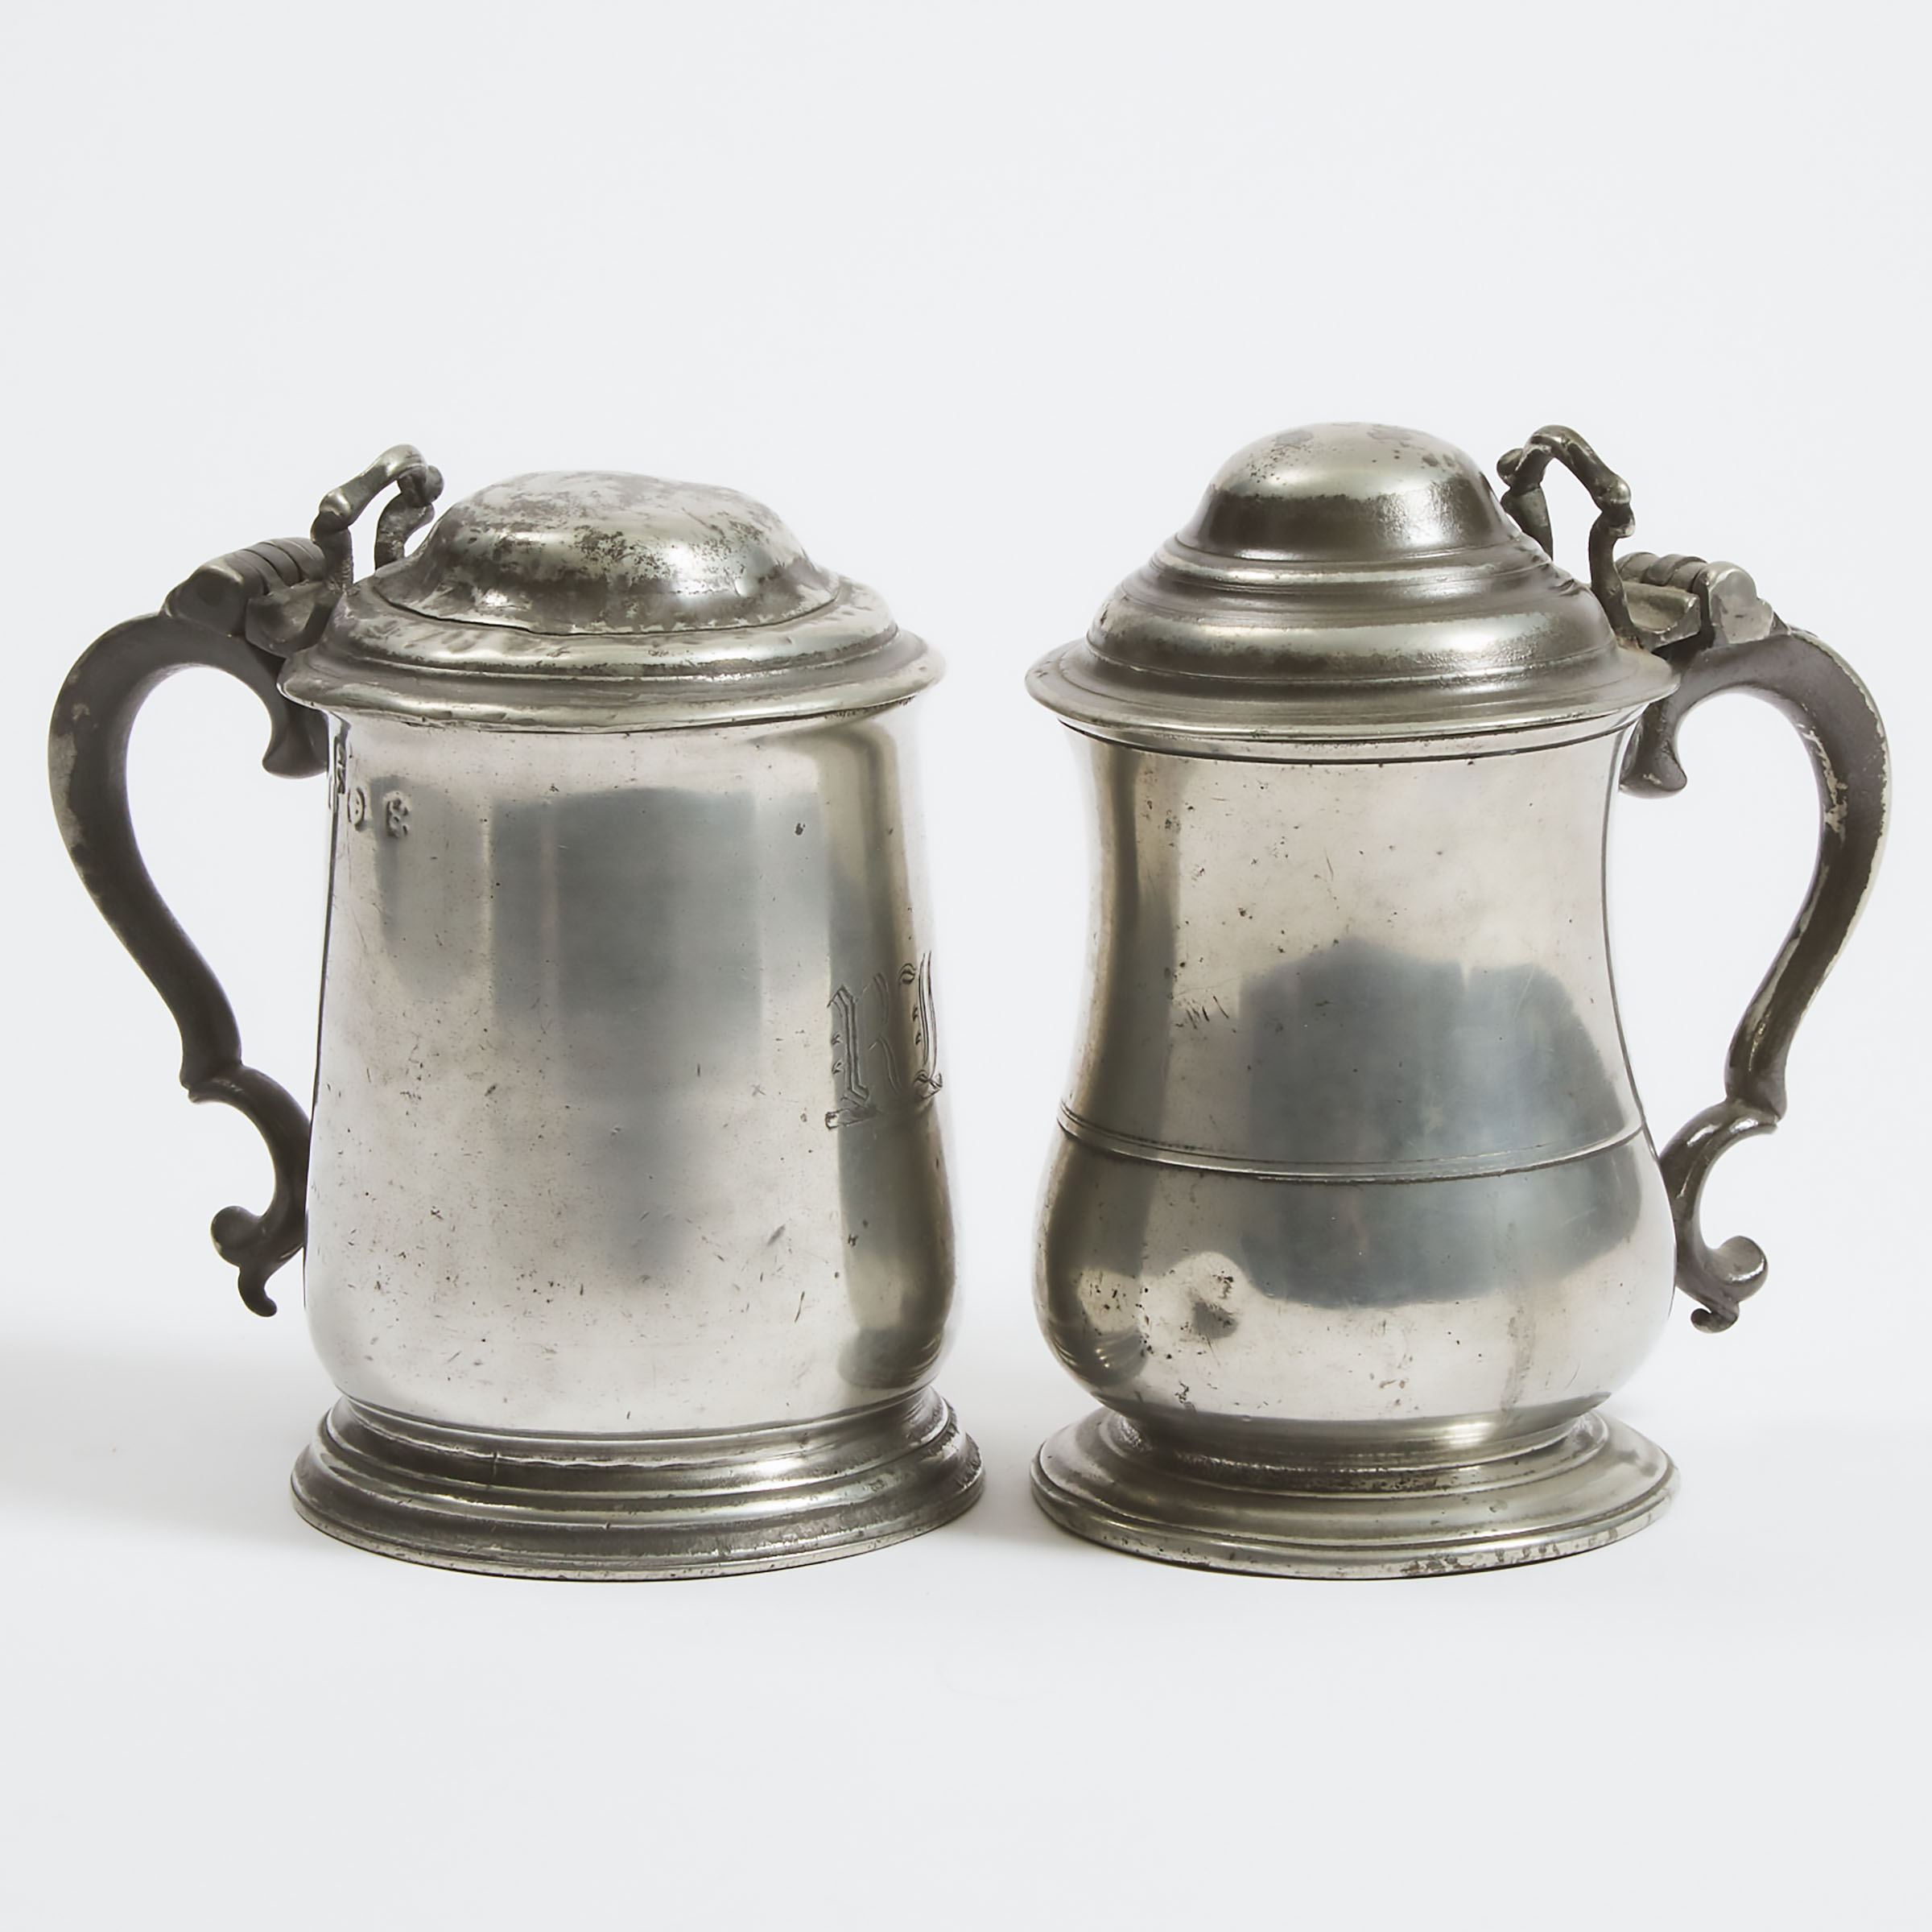 Two English Pewter Dome Lidded Tankards, late 18th/early 19th century